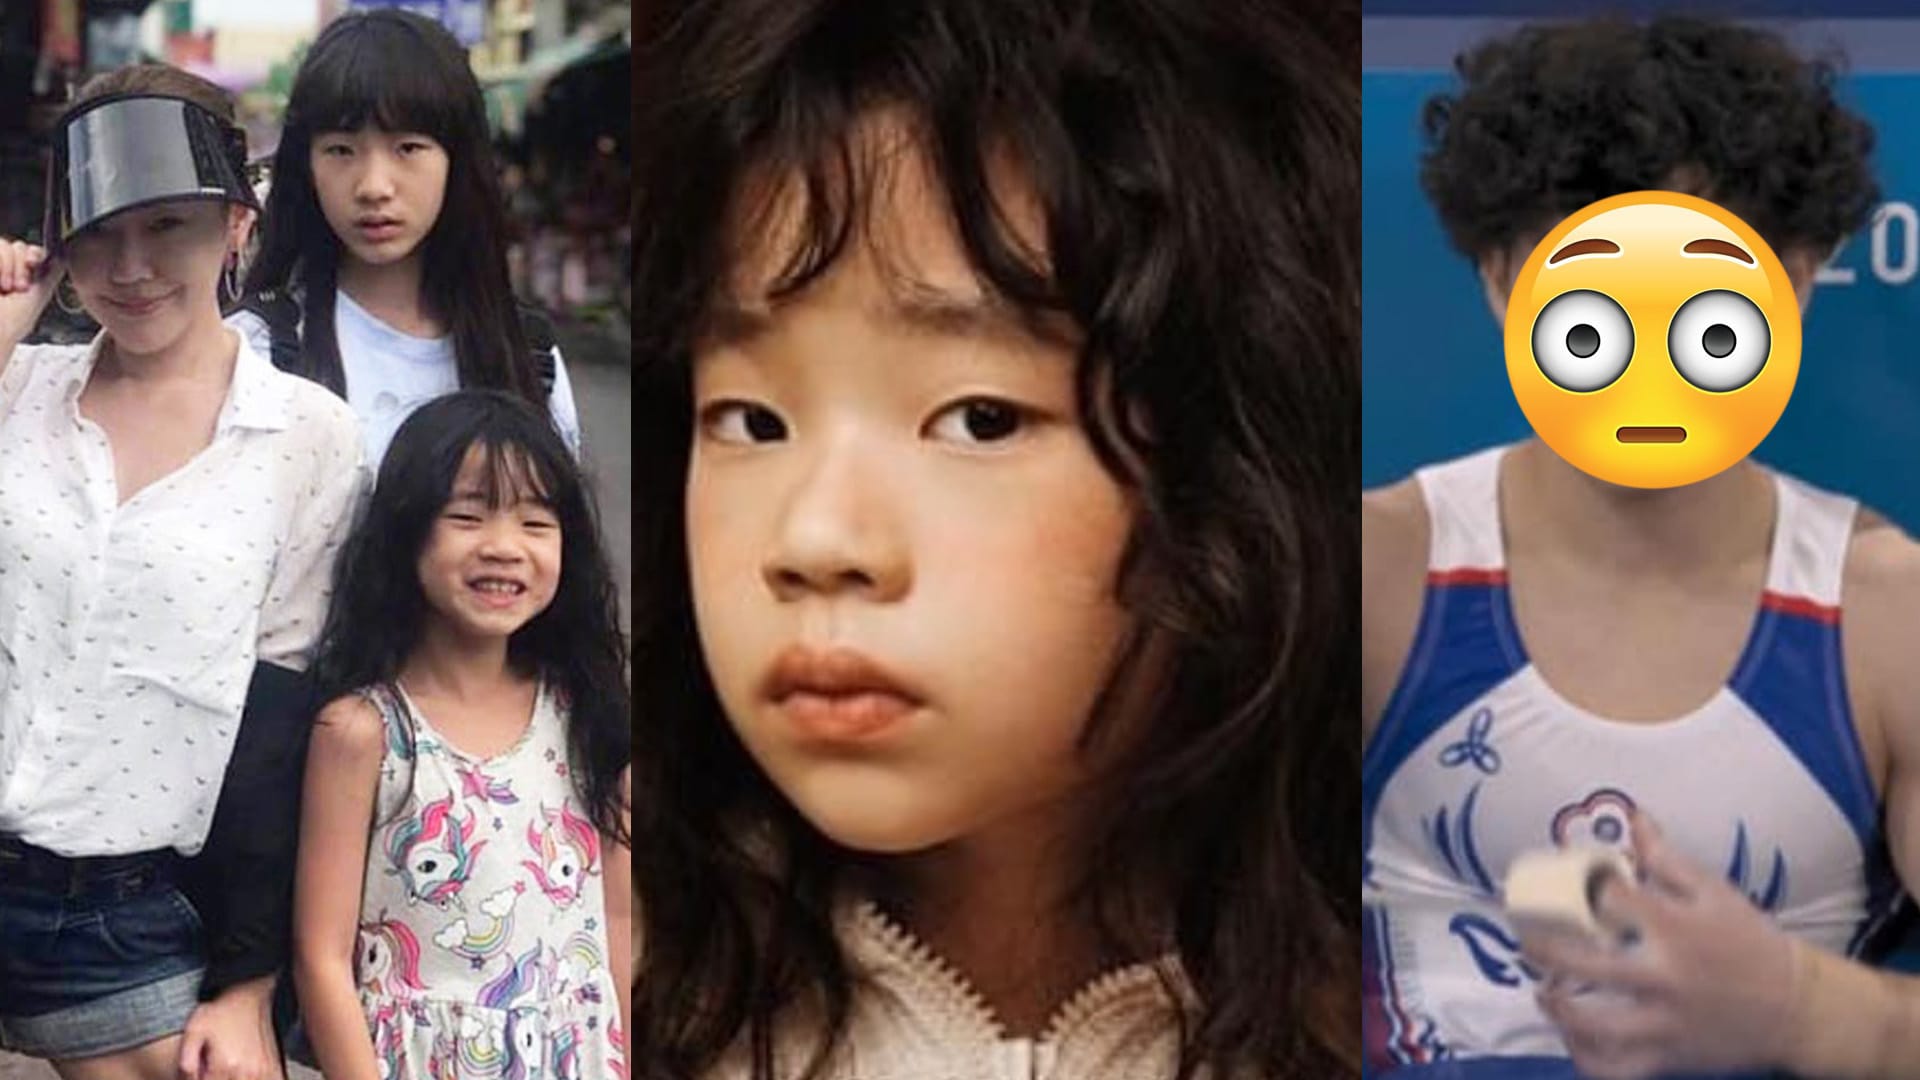 Male Taiwanese Olympic Gymnast Goes Viral For Looking Like Dee Hsu's 8-Year-Old Daughter